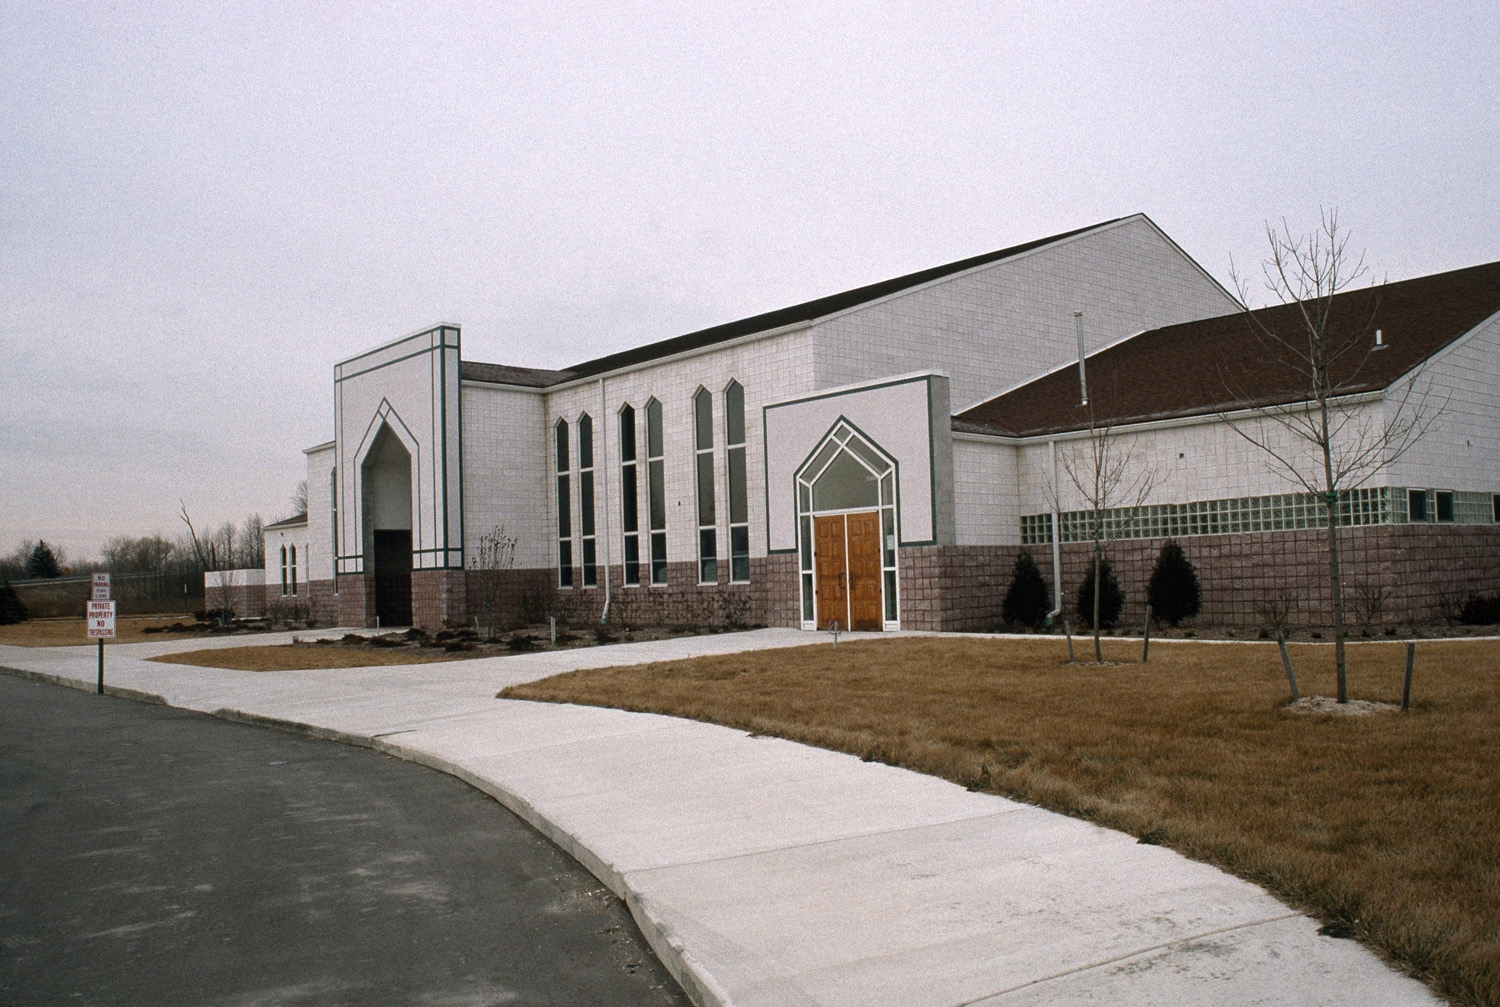 View looking southwest along front facade of school